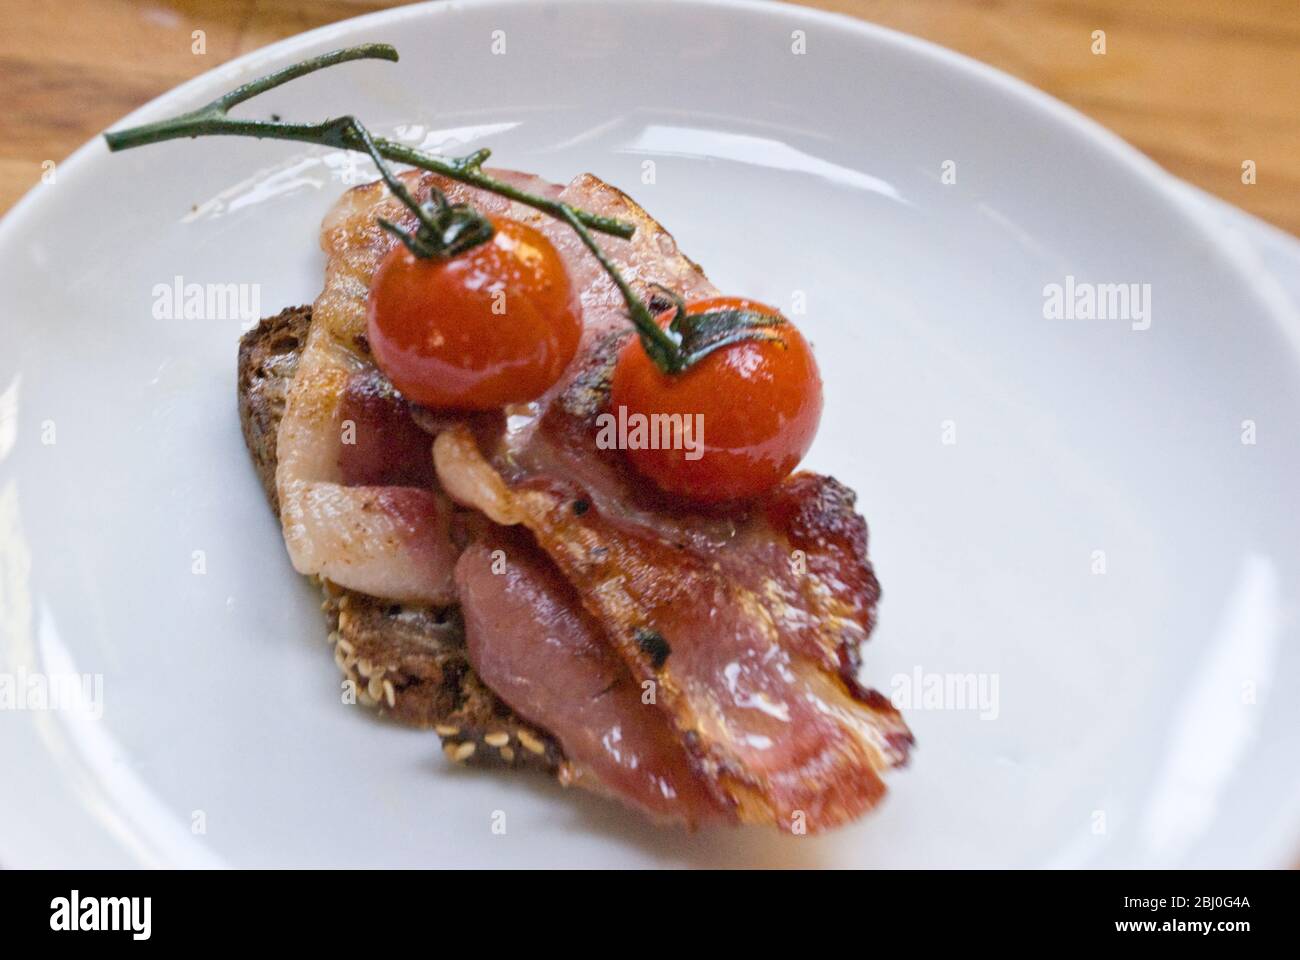 Breakfast dish of coarse wholemeal rye bread with organic bacon and griddled chery tomatoes on the vine - Stock Photo